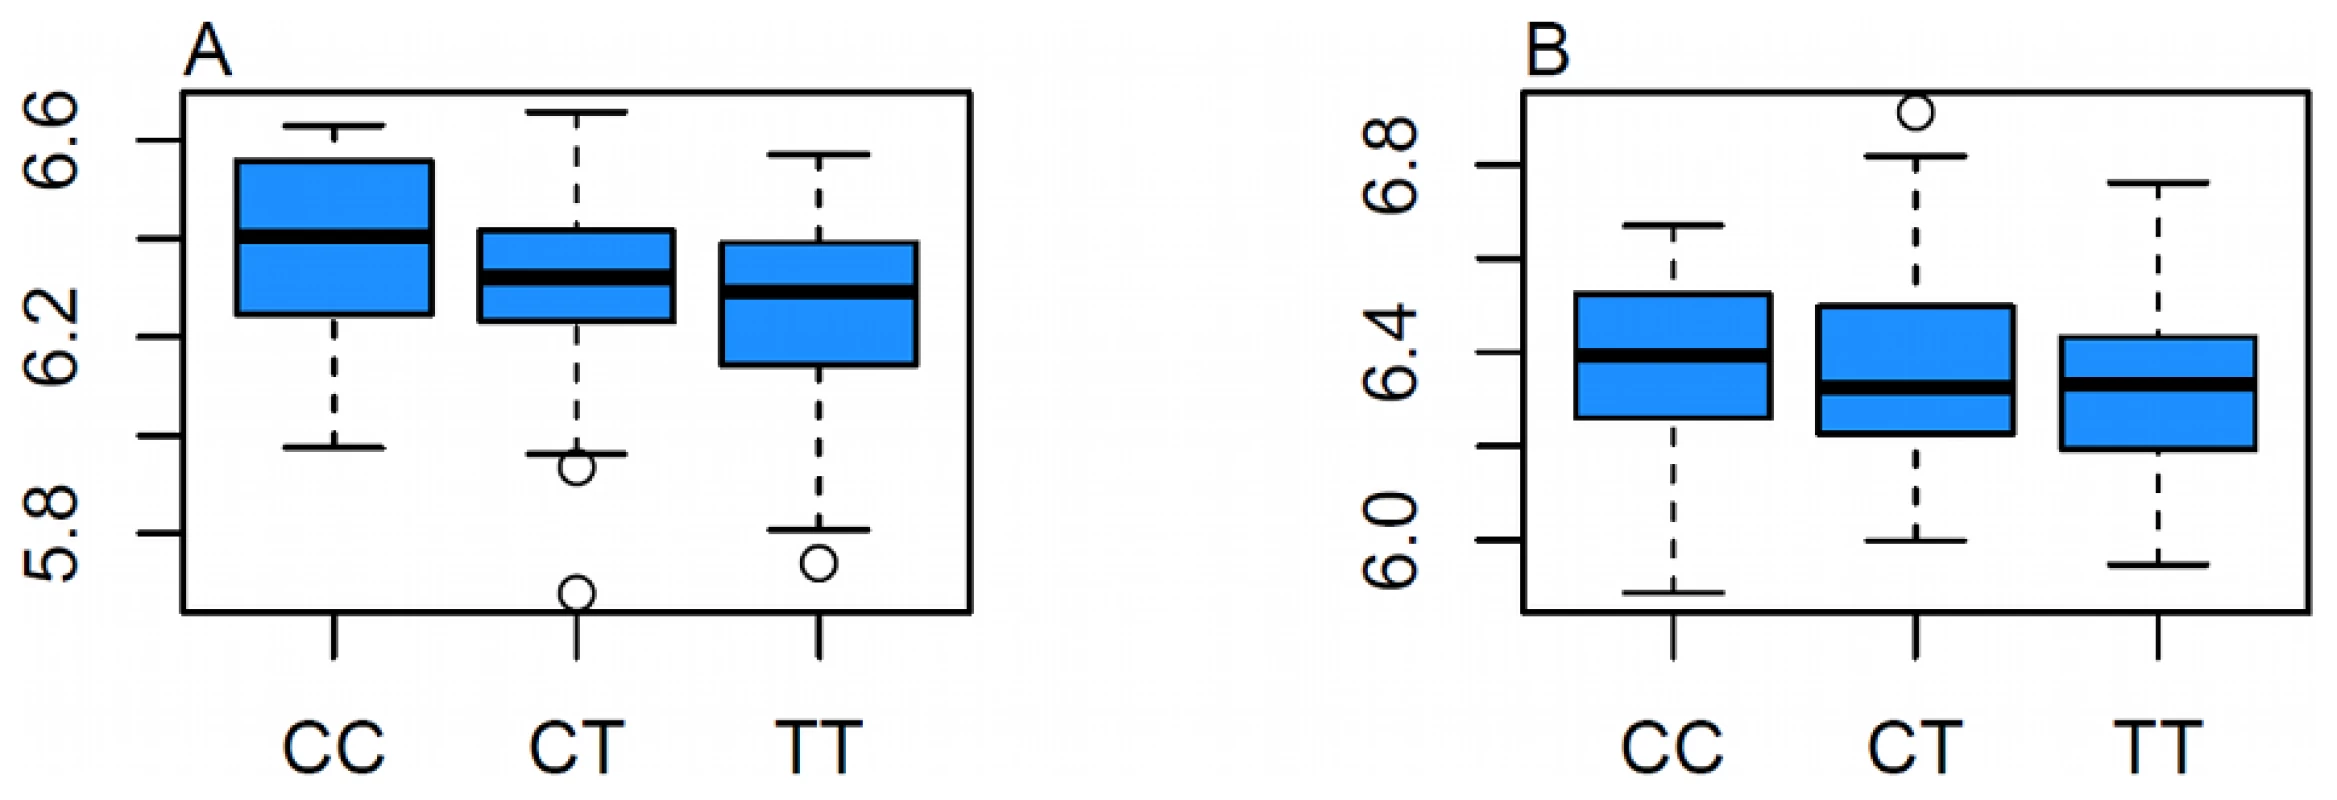 Effect of rs7120118 on <i>NR1H3</i> Gene Expression in Tissue.